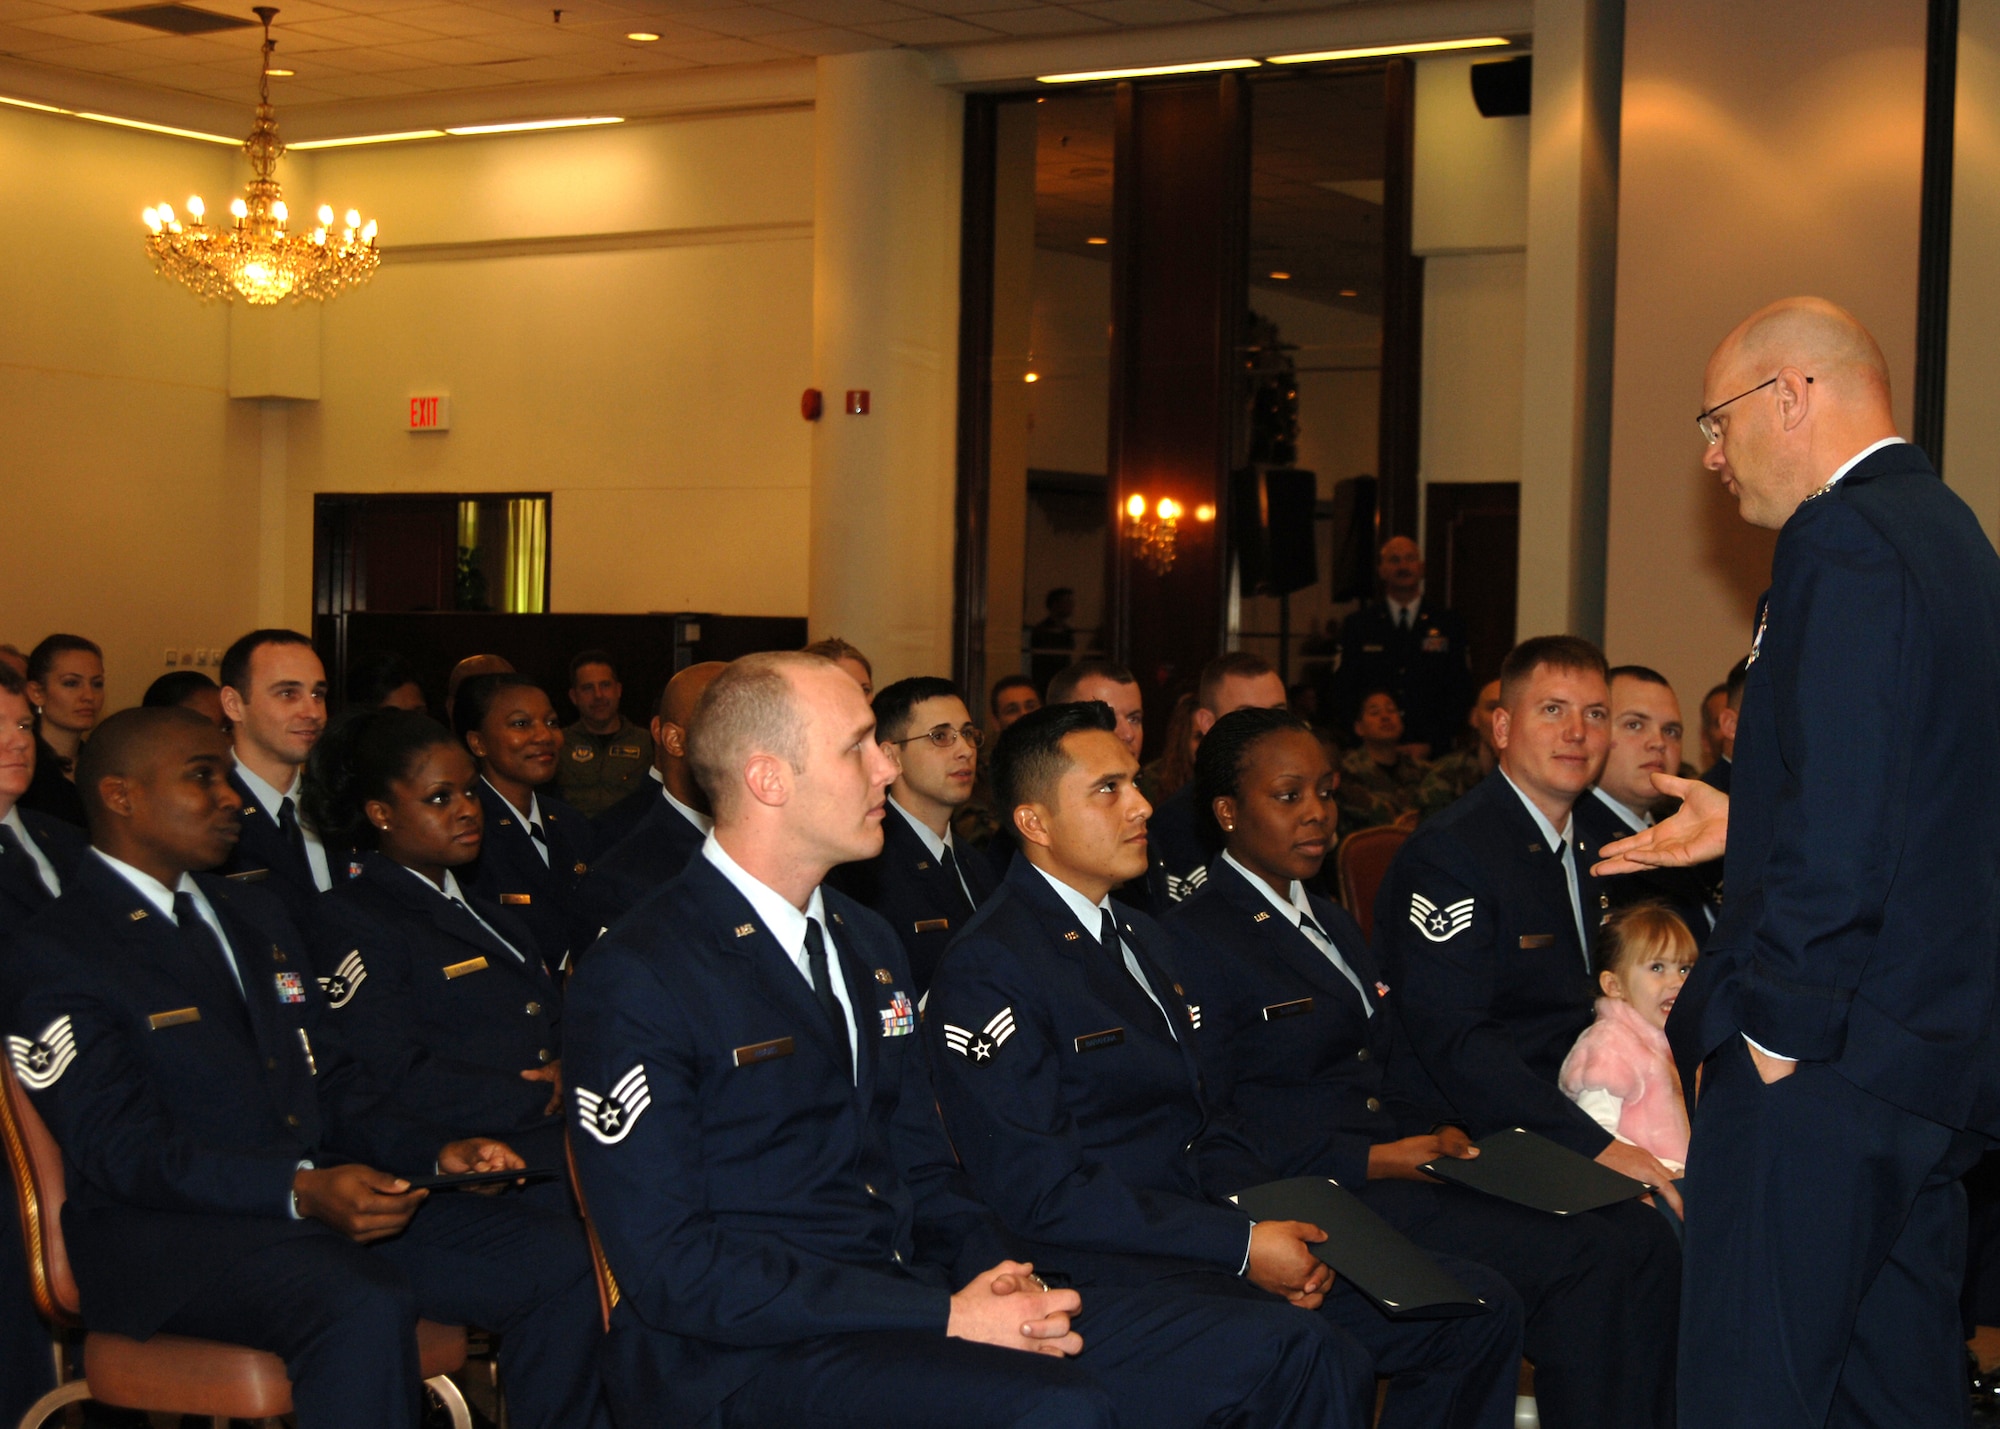 Col. Murrell "Tip" Stinnette, (right) 39th Air Base Wing commander, speaks to graduates of the Community College of the Air Force during the graduation ceremony held at the Incirlik Club Complex, Dec. 15. (U.S. Air Force photo by Airman 1st Class Kelly L. LeGuillon) 